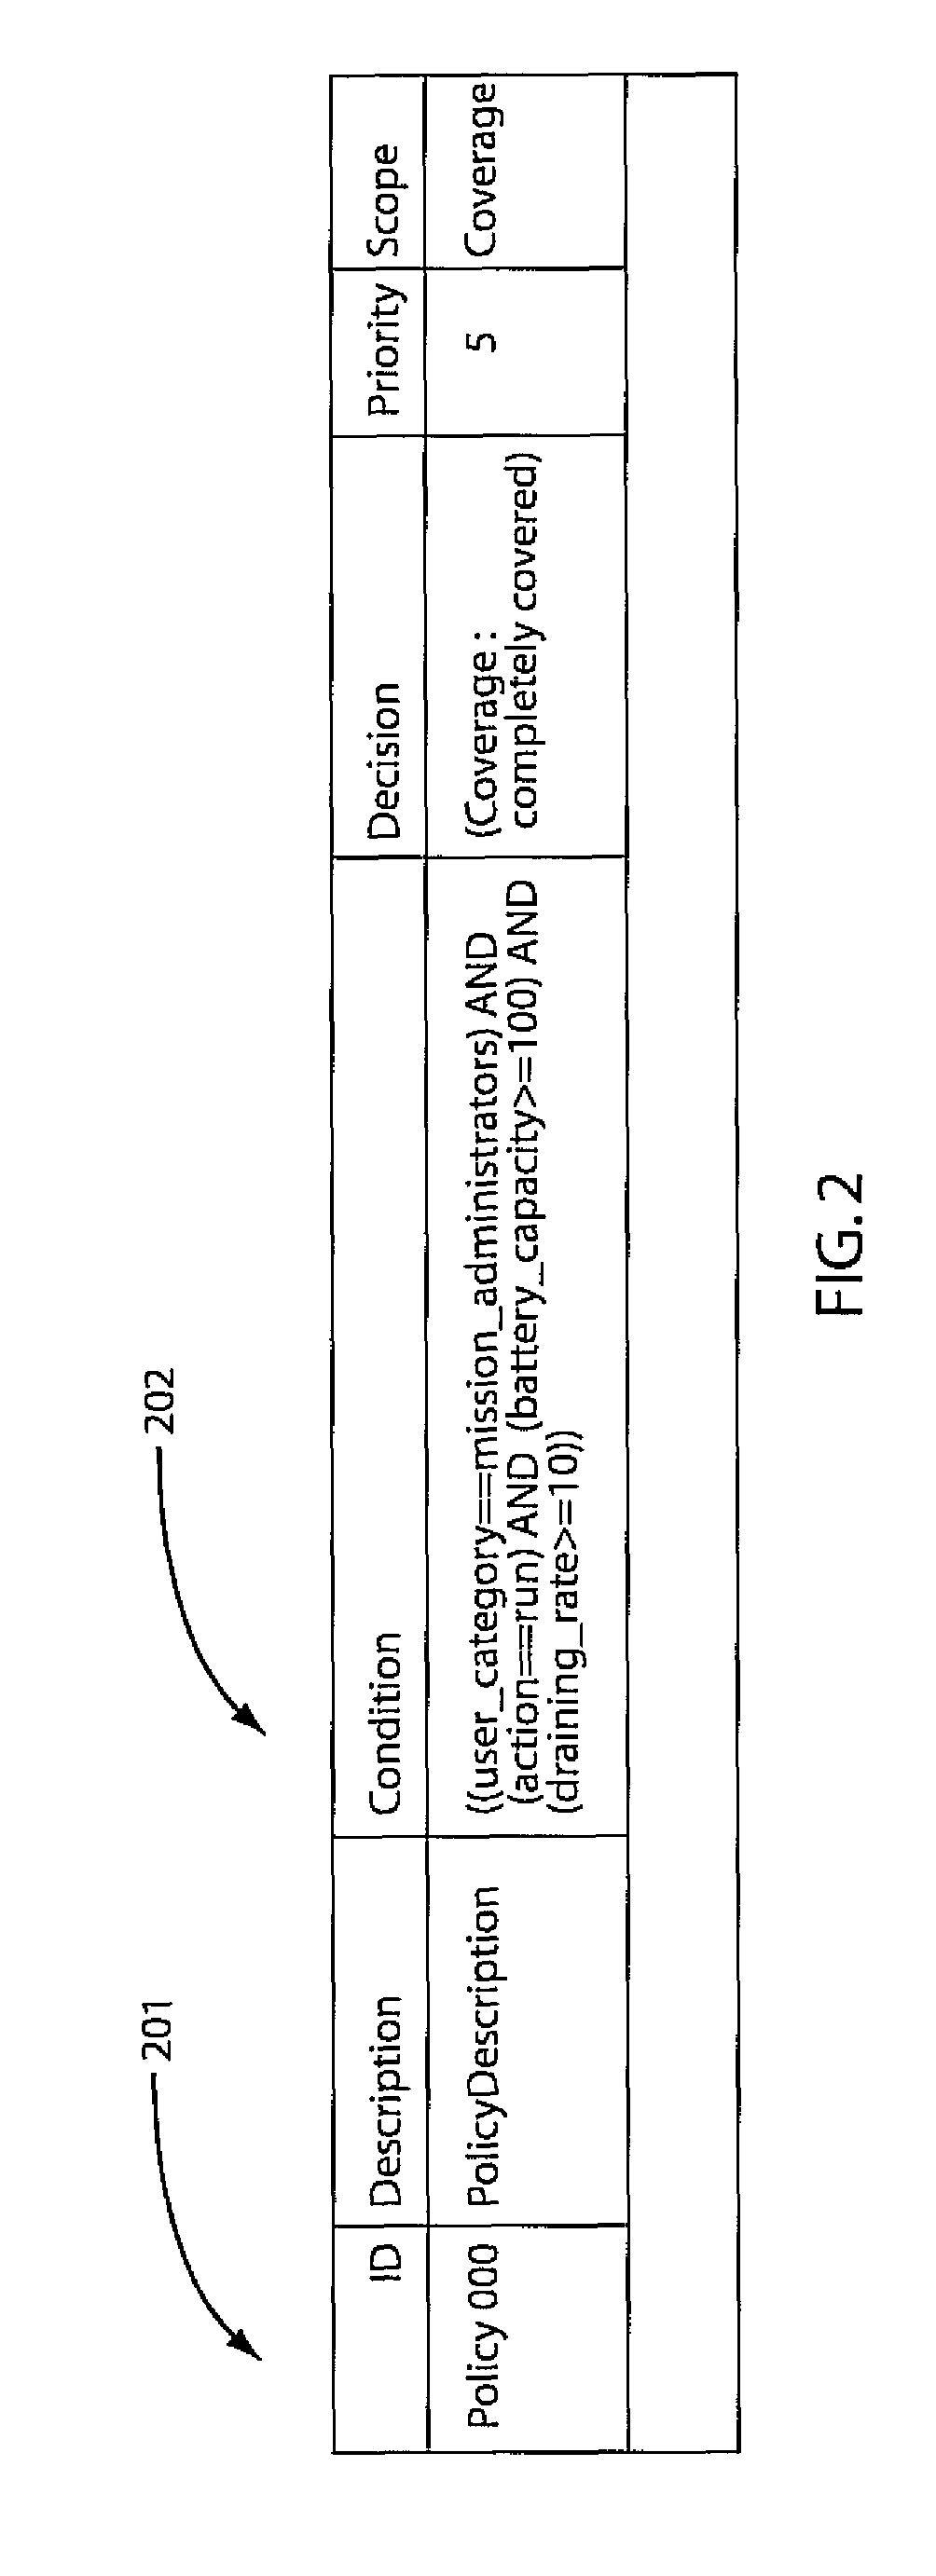 System and method for automatically generating suggested entries for policy sets with incomplete coverage